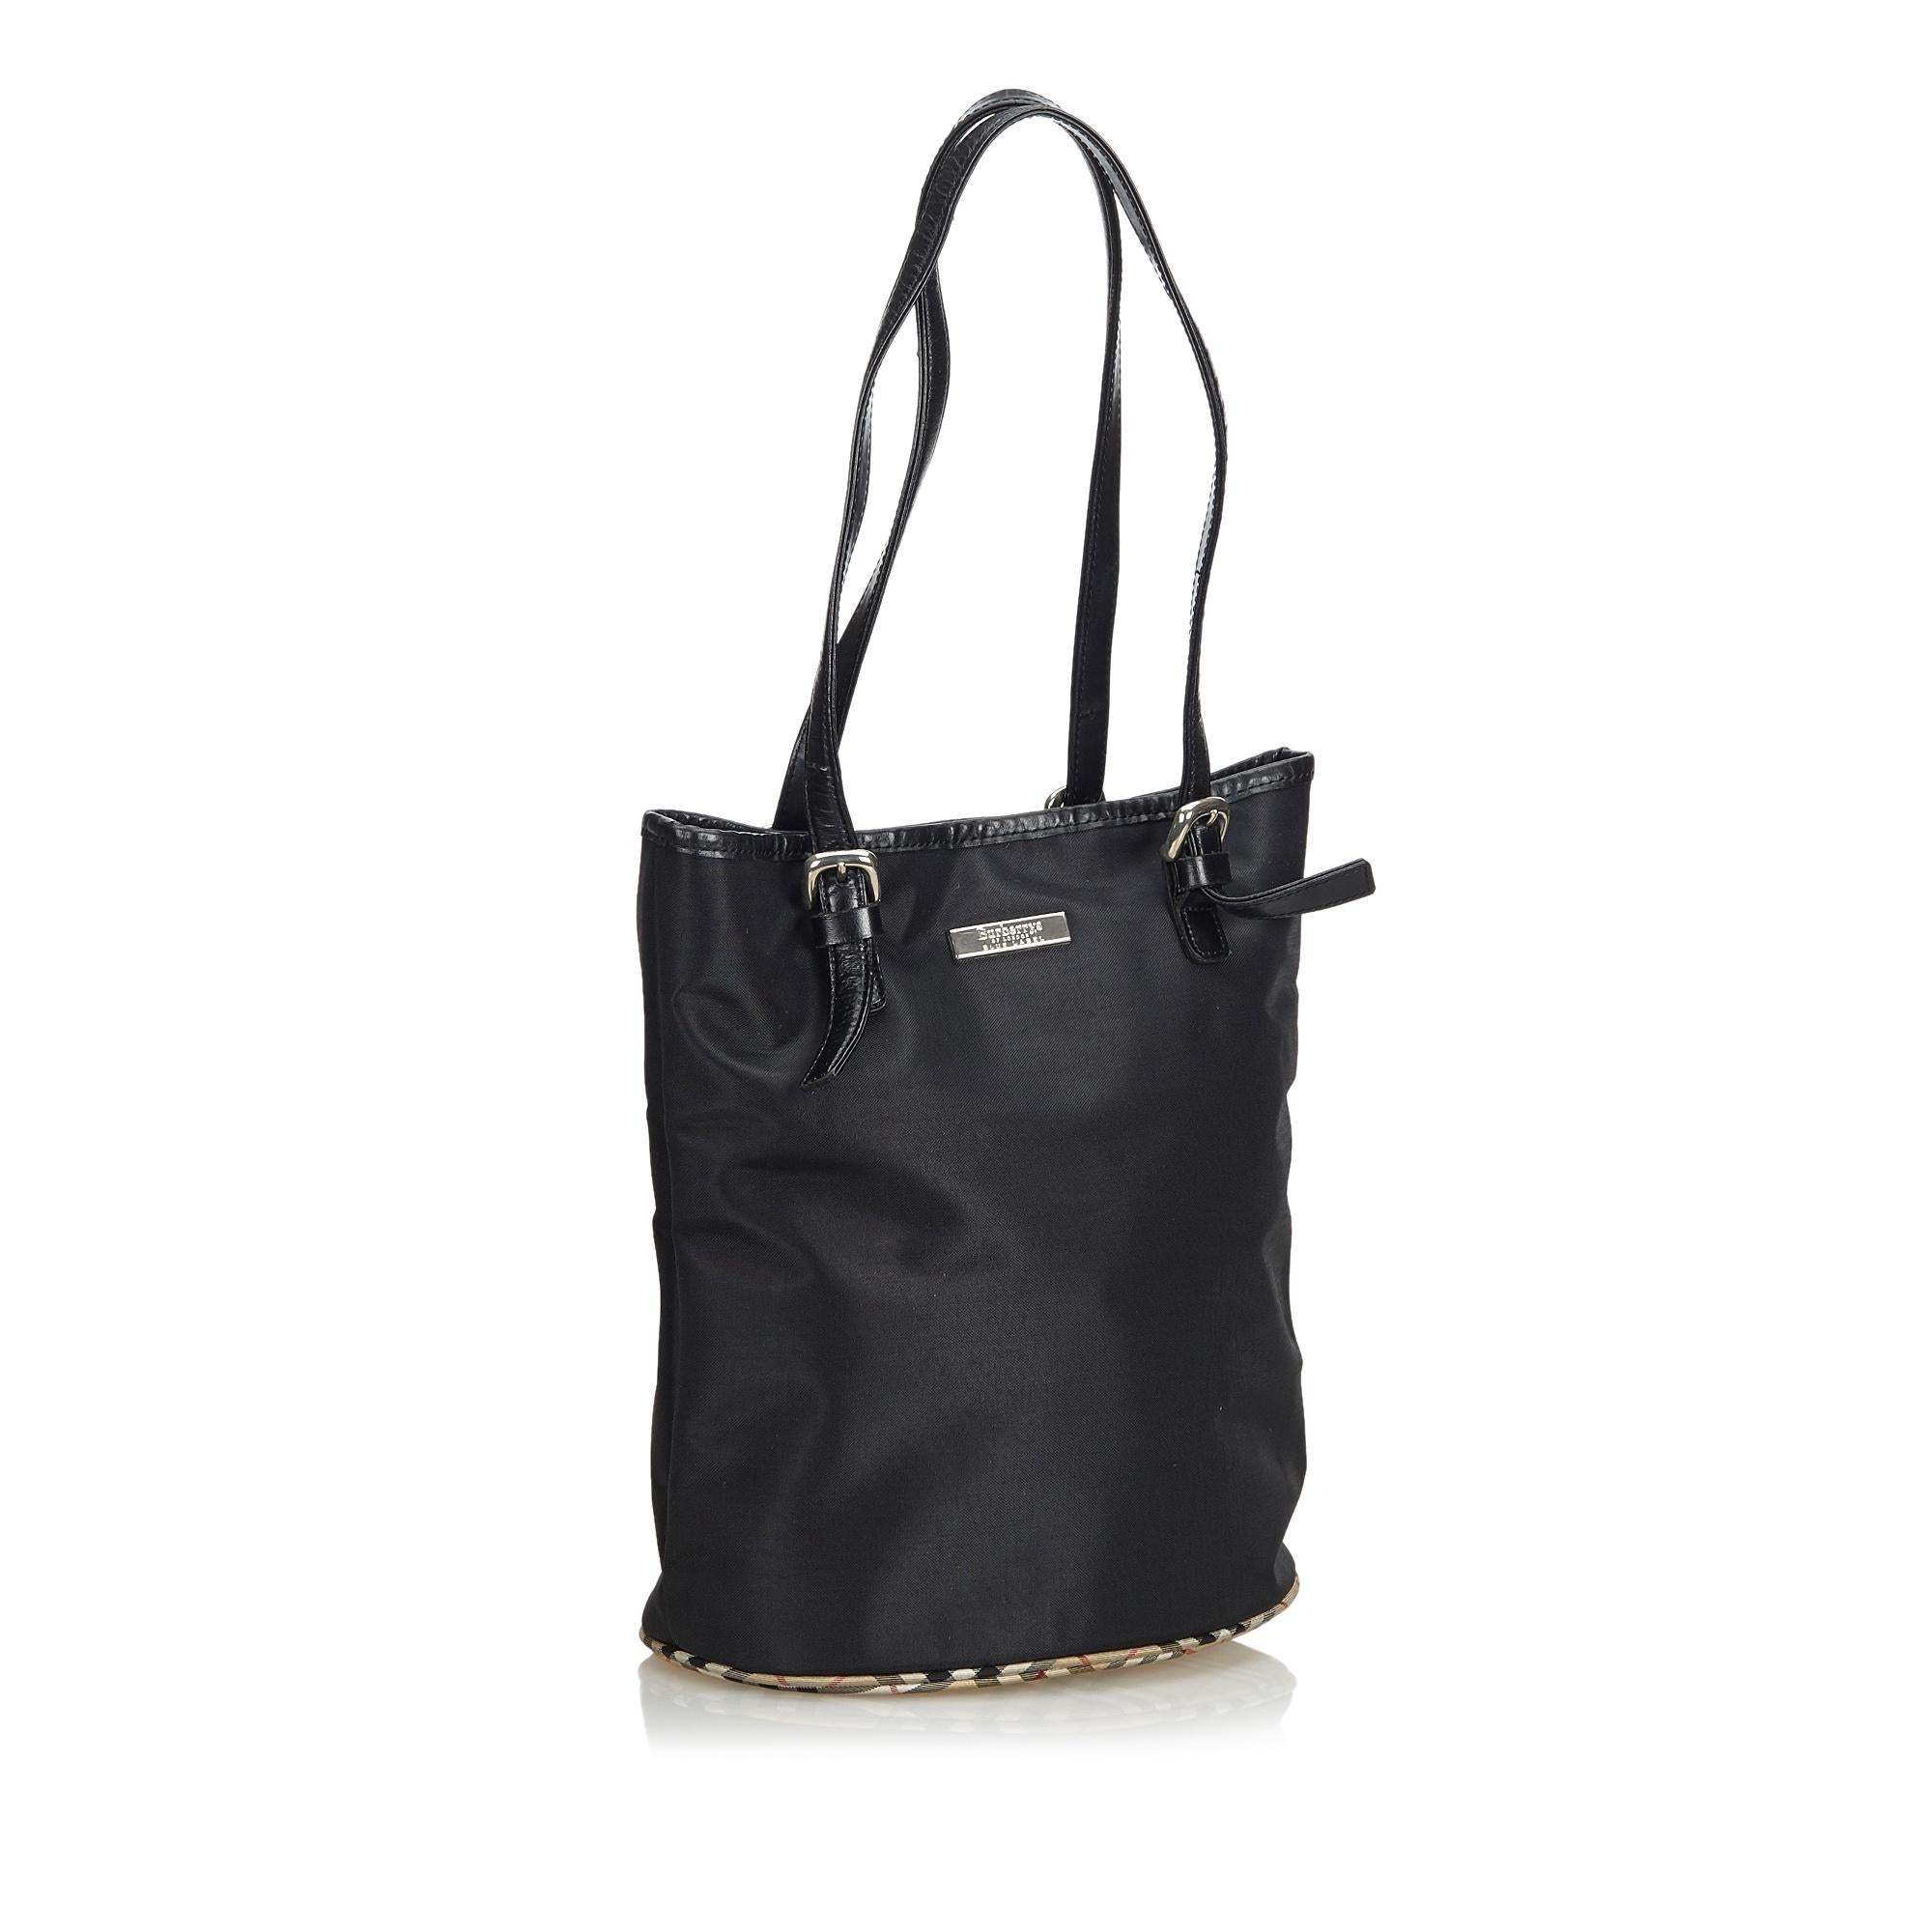 This tote bag features a nylon body with canvas bottom, a flat leather straps, an open top, and an interior zip pocket It carries as B condition rating.

Inclusions: 
This item does not come with inclusions.

Dimensions:
Length: 28.00 cm
Width: